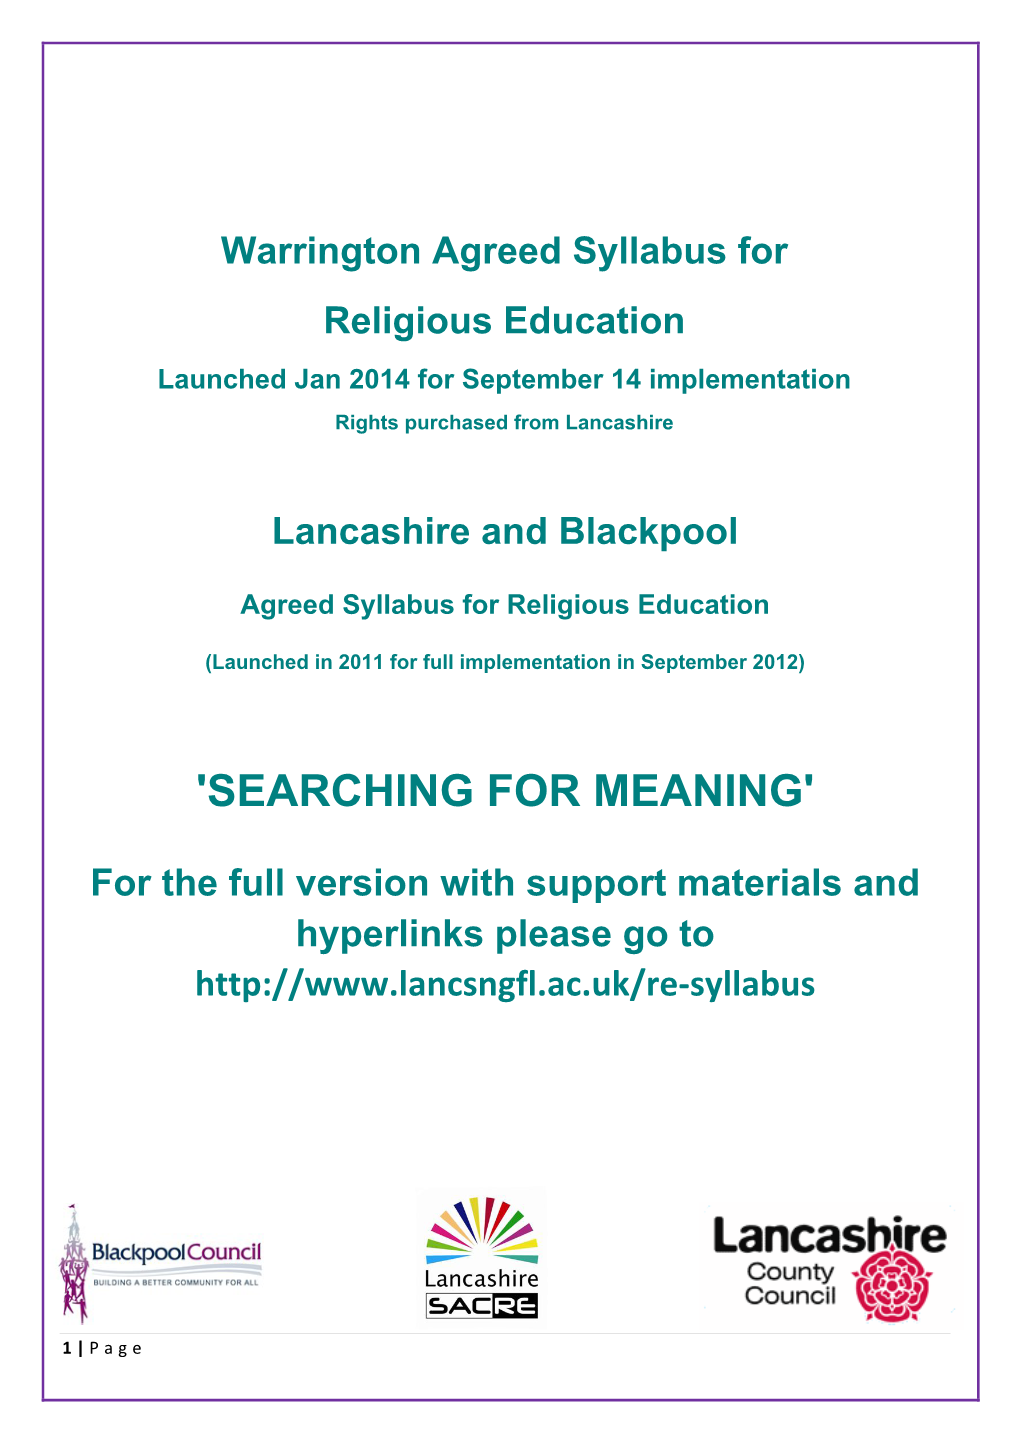 Warrington Agreed Syllabus for Religious Education Launched Jan 2014 for September 14 Implementation Rights Purchased from Lancashire